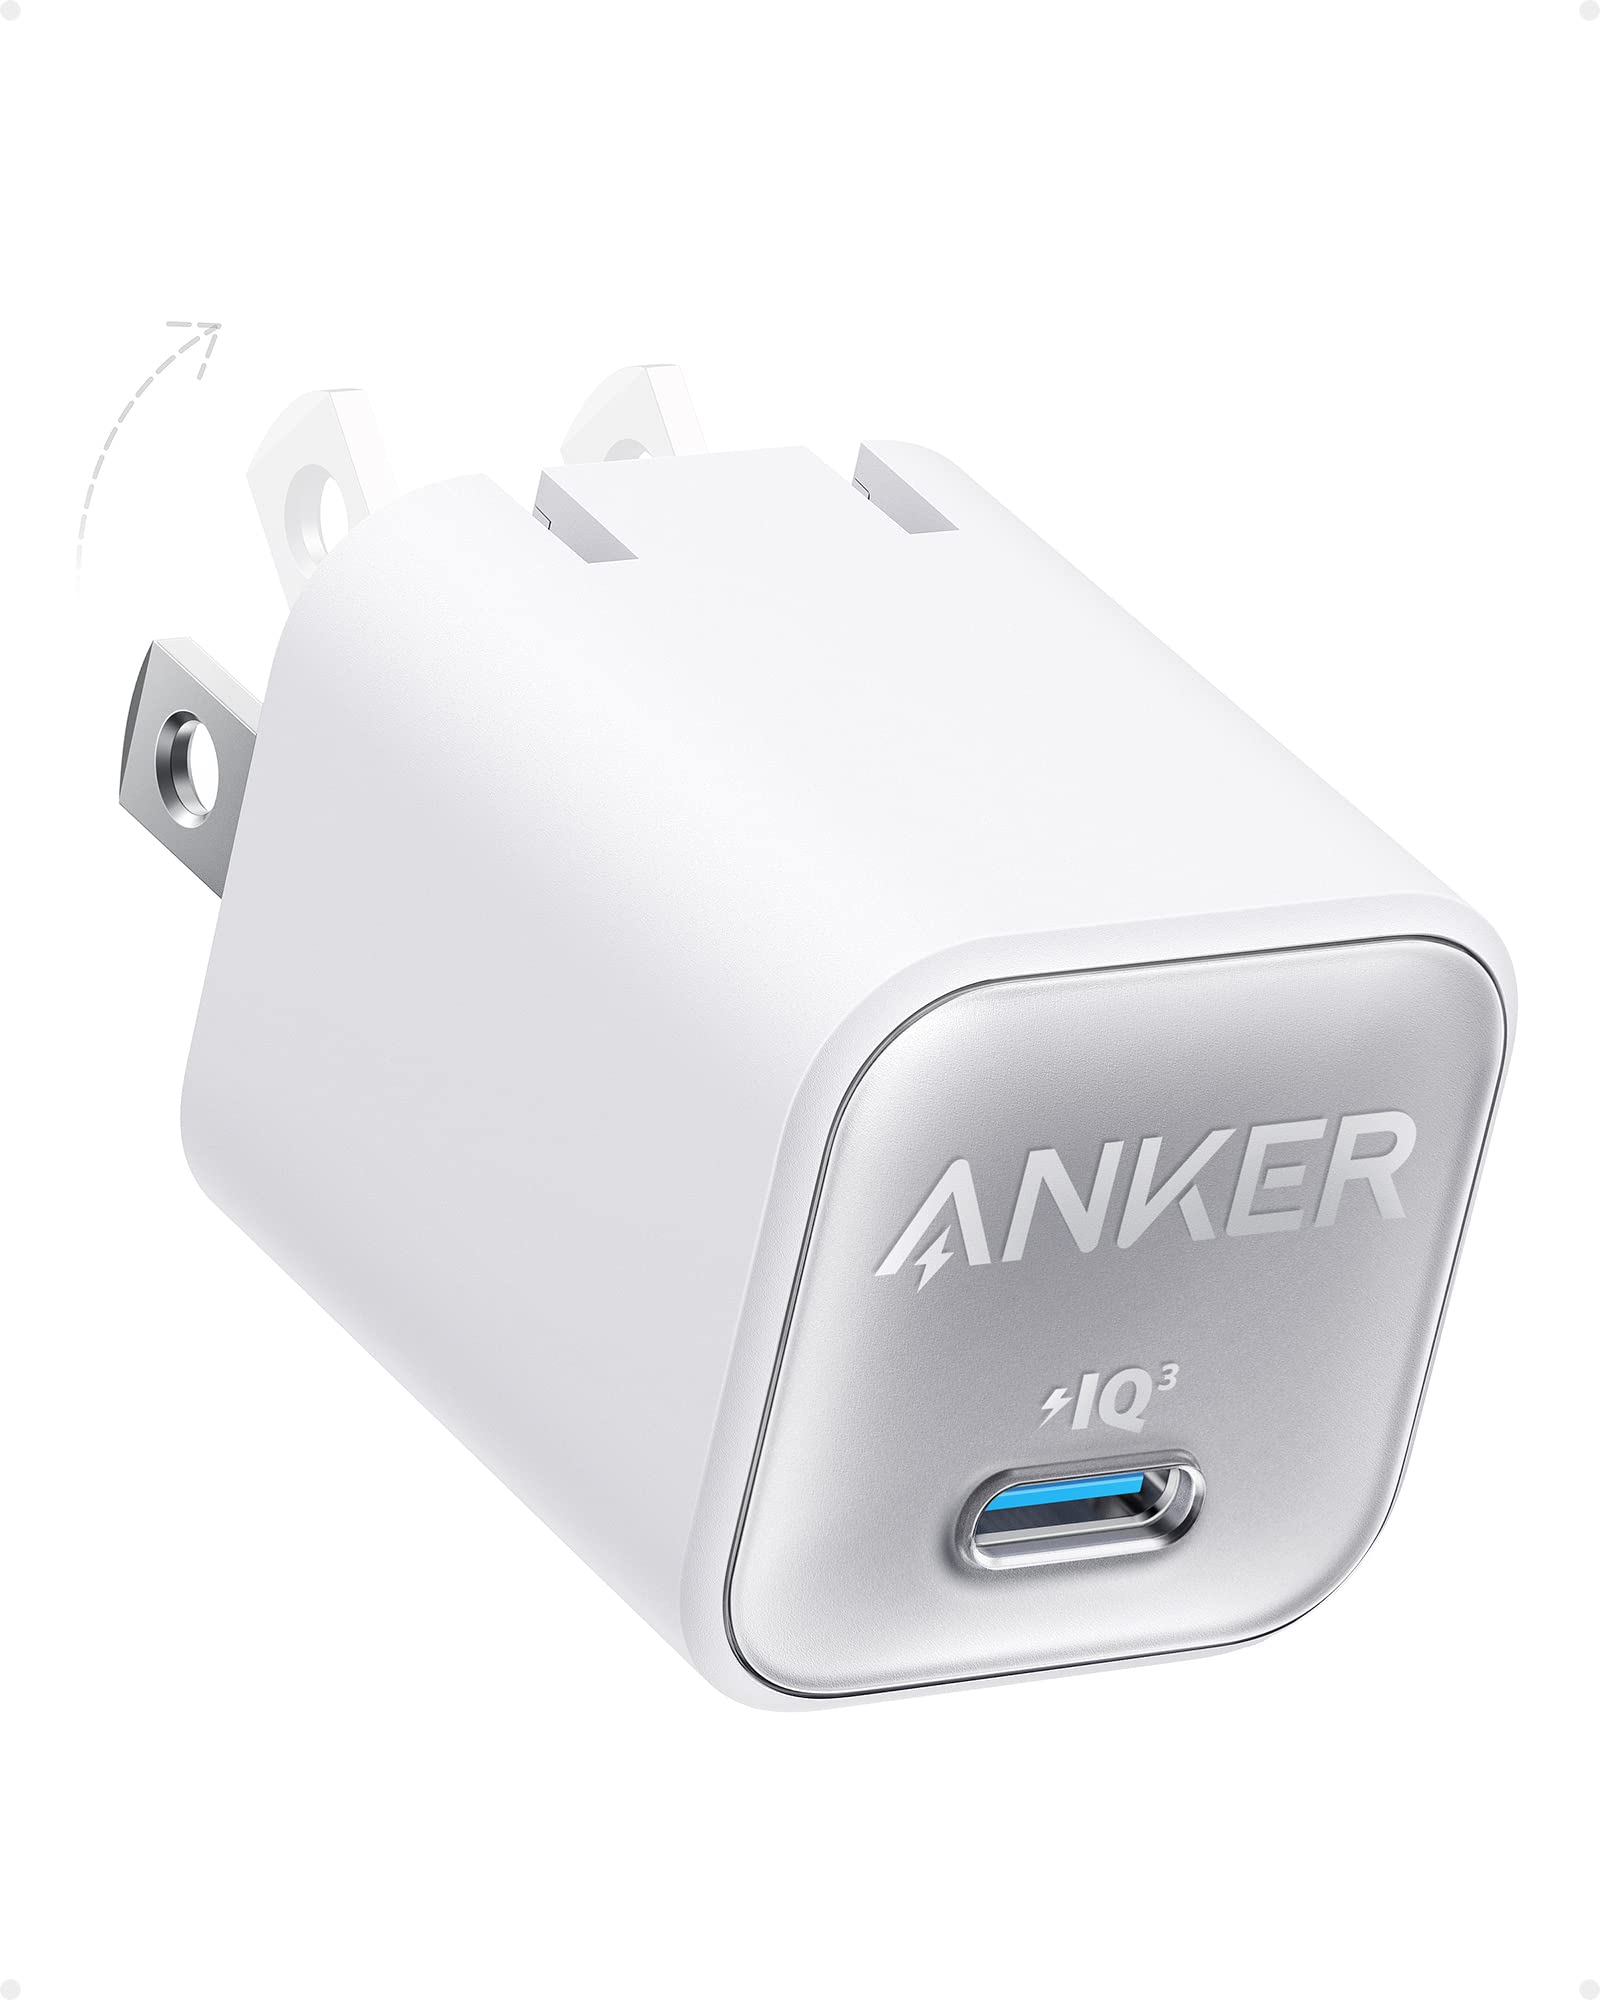 USB C GaN Charger 30W, Anker 511 Charger (Nano 3), PIQ 3.0 Foldable PPS Fast Charger for iPhone 14/14 Pro/14 Pro Max/13 Pro/13 Pro Max, Galaxy, iPad (Cable Not Included) - Aurora White